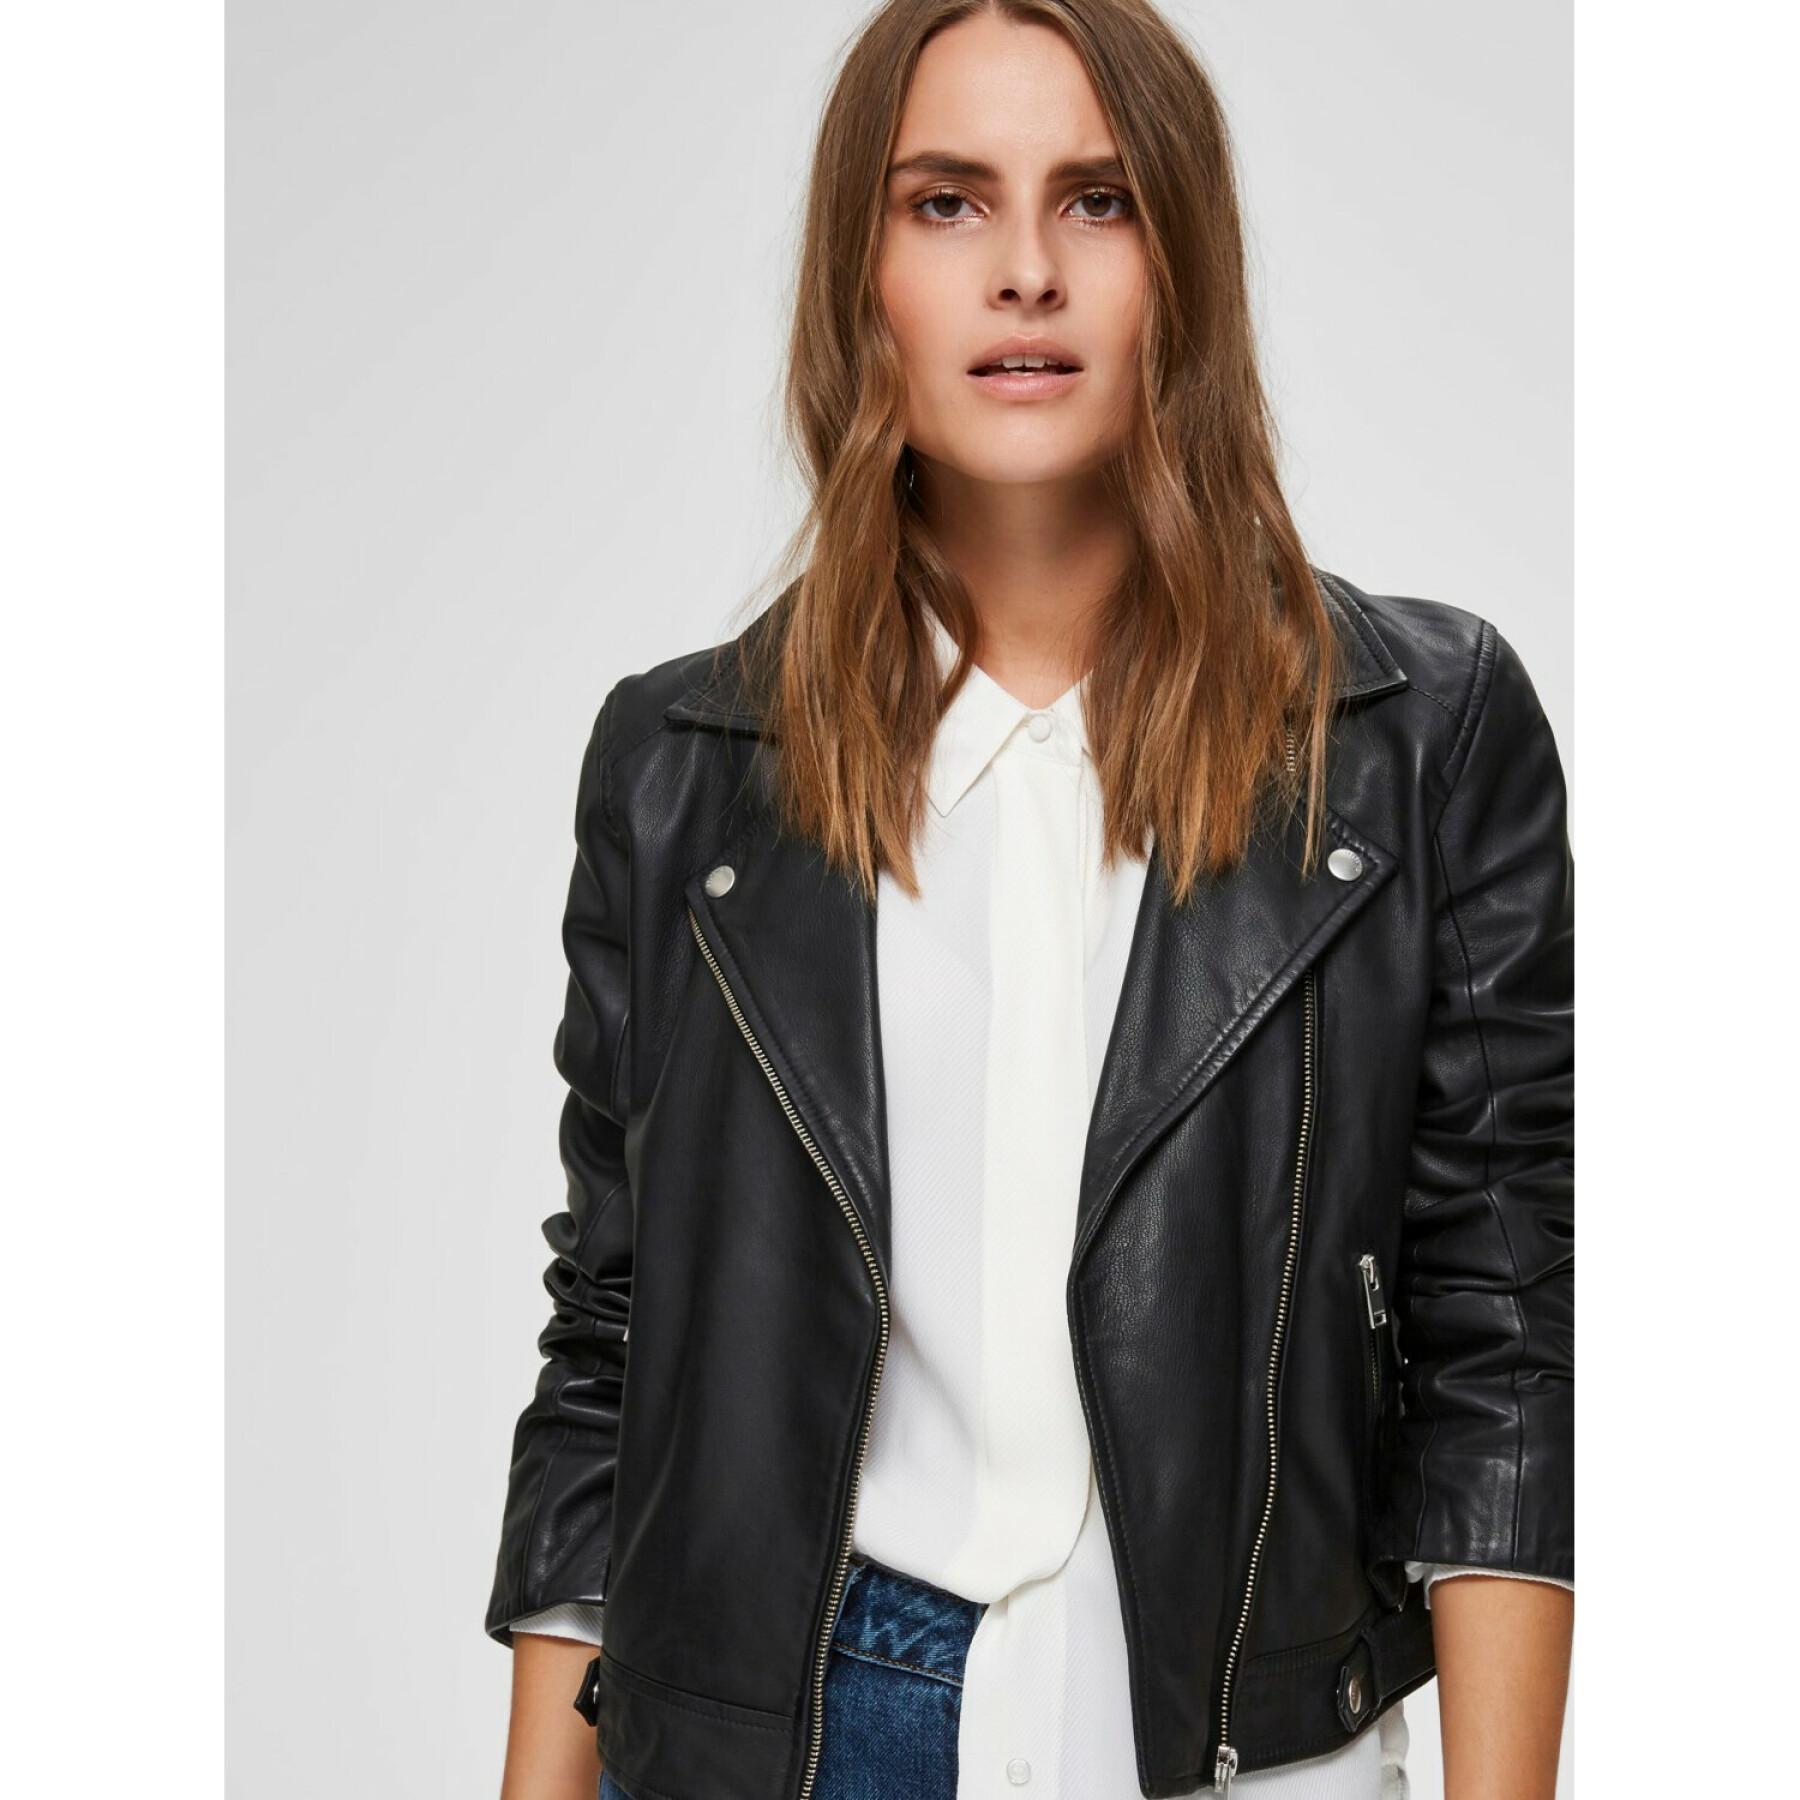 Leather jacket woman Selected Katie